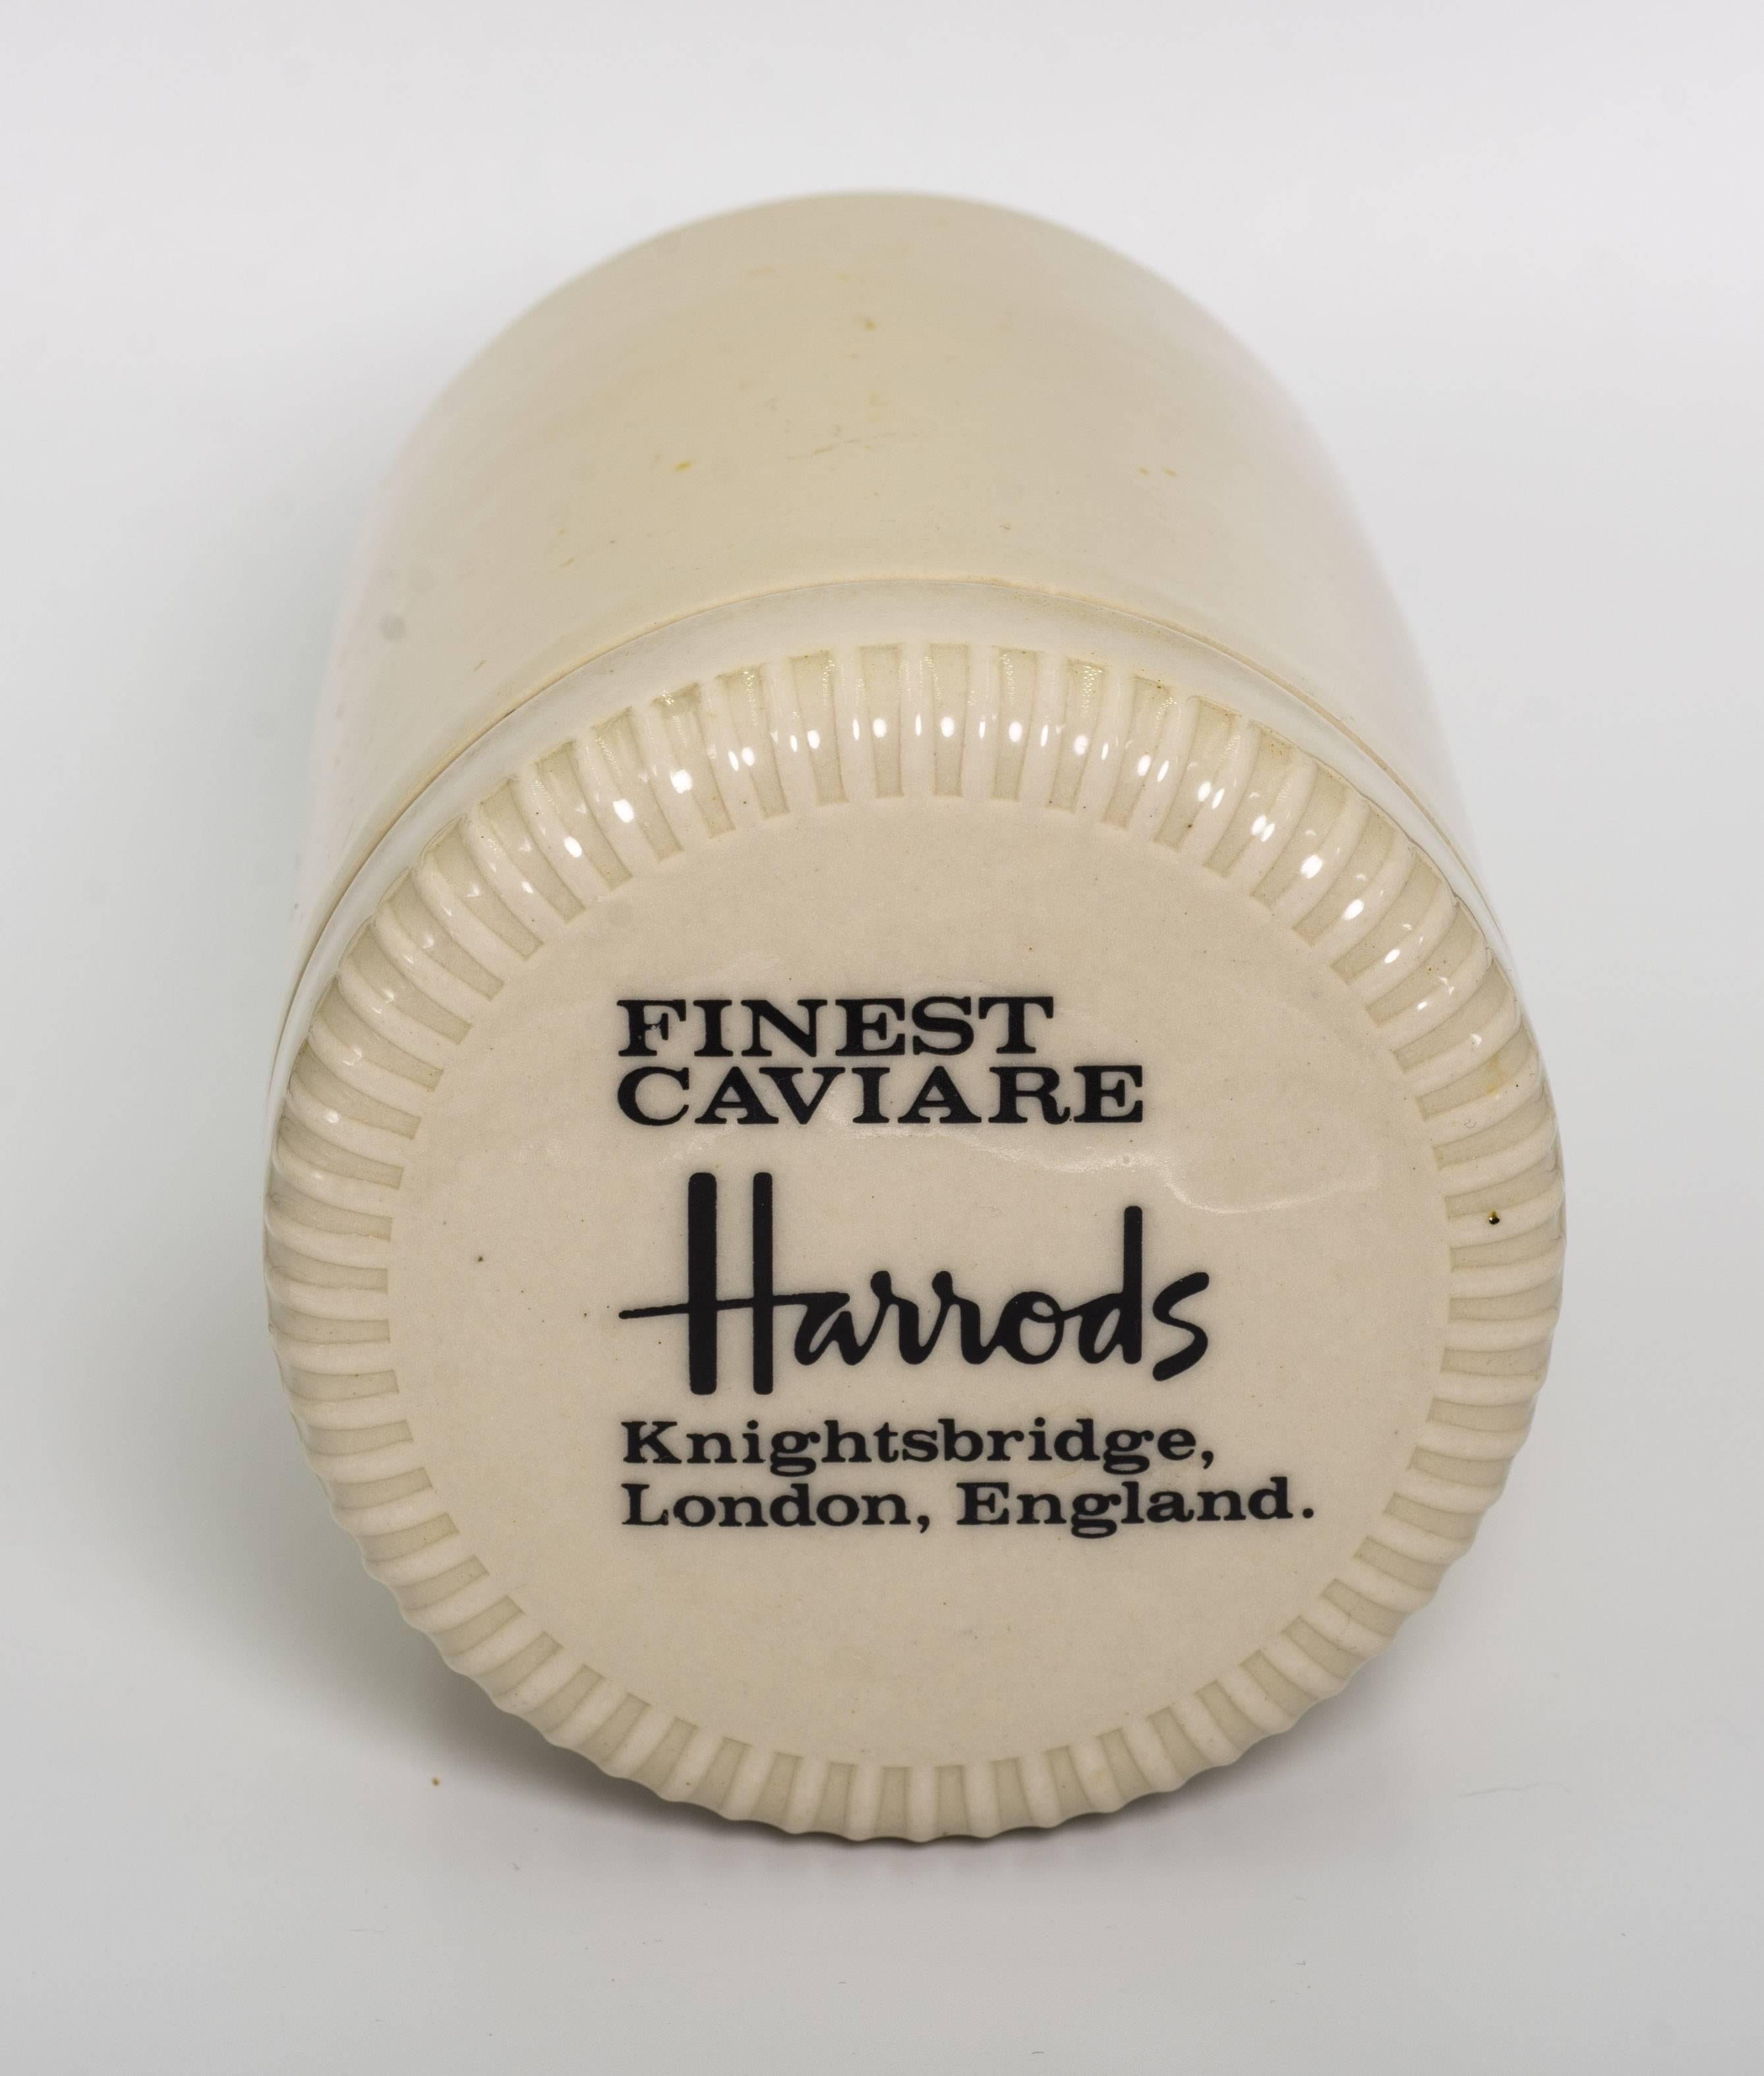 A Harrods Knightsbridge London hand-painted ironstone jar for one pound or 450 grams of Beluga Caviar ordered Christmas, 1978.

James Bond bought his caviar at Harrods, Fortnum & Mason and when dining in public at Maison Prunier